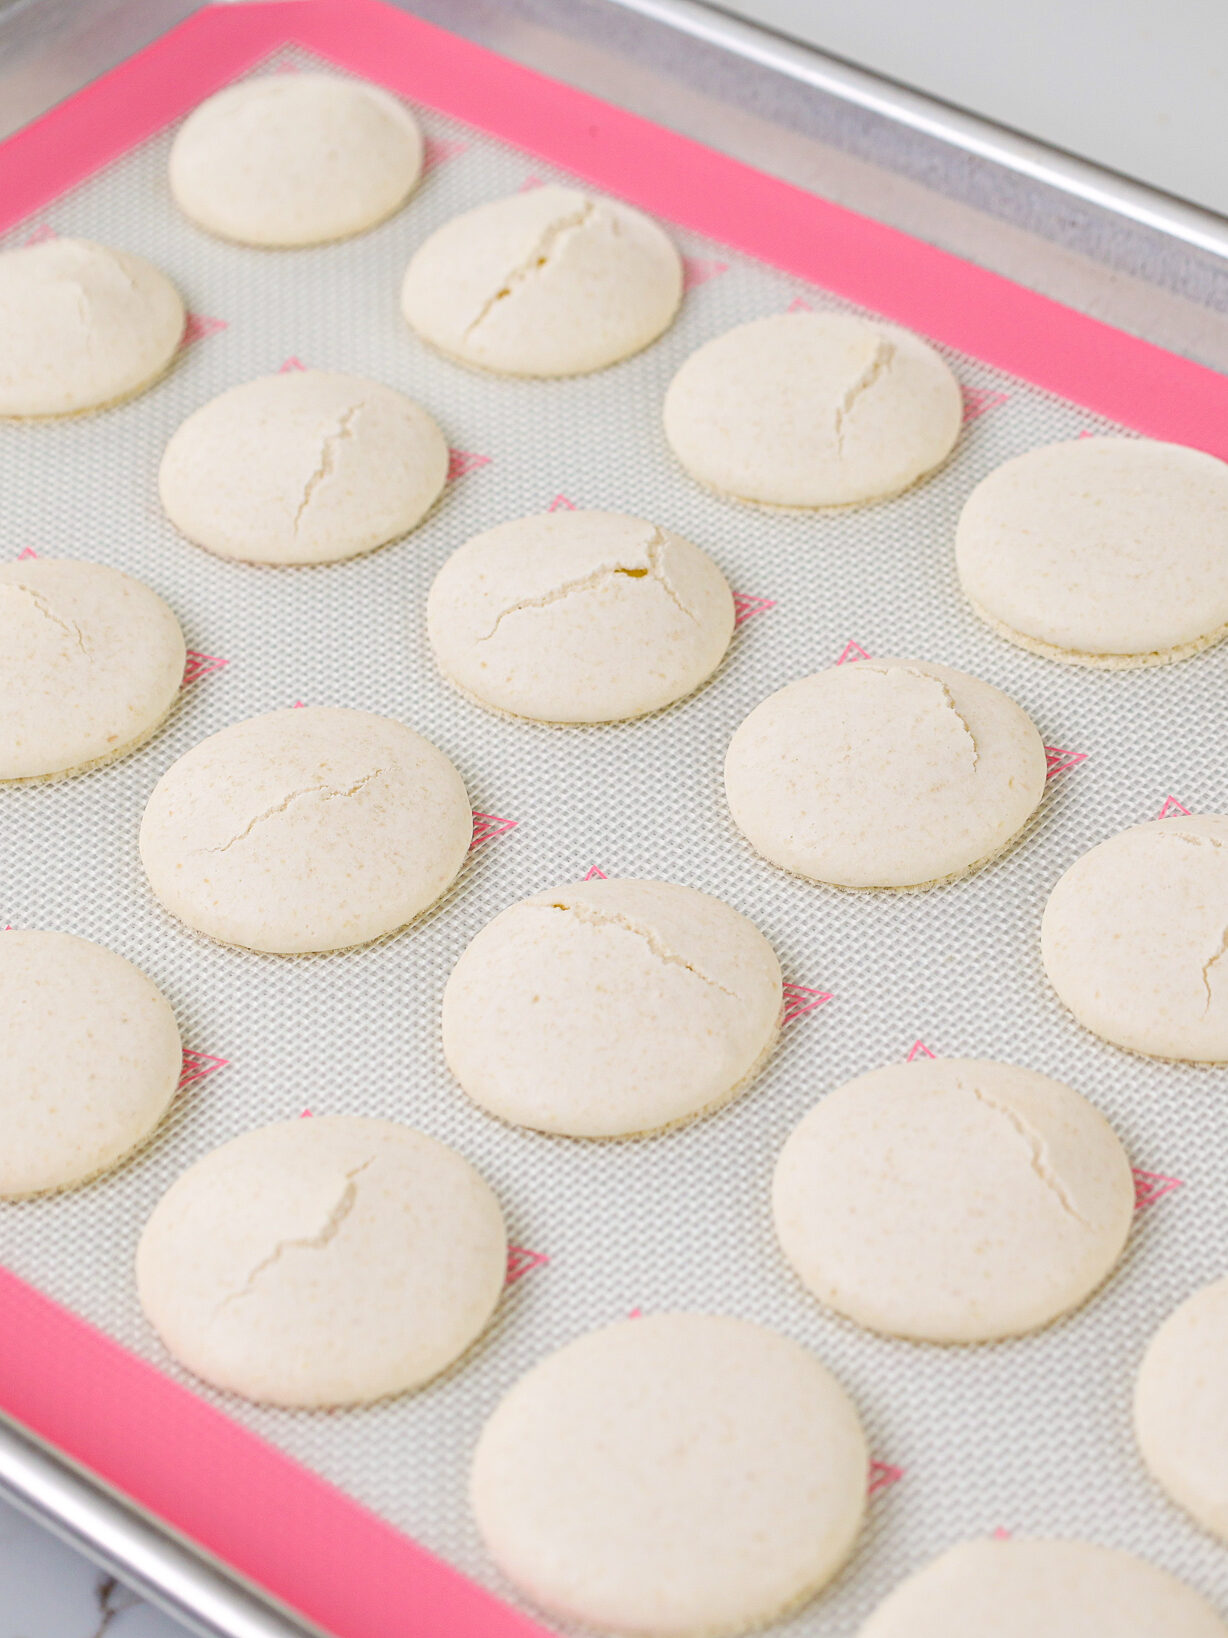 image of white macaron shells that have cracked because the oven was too hot